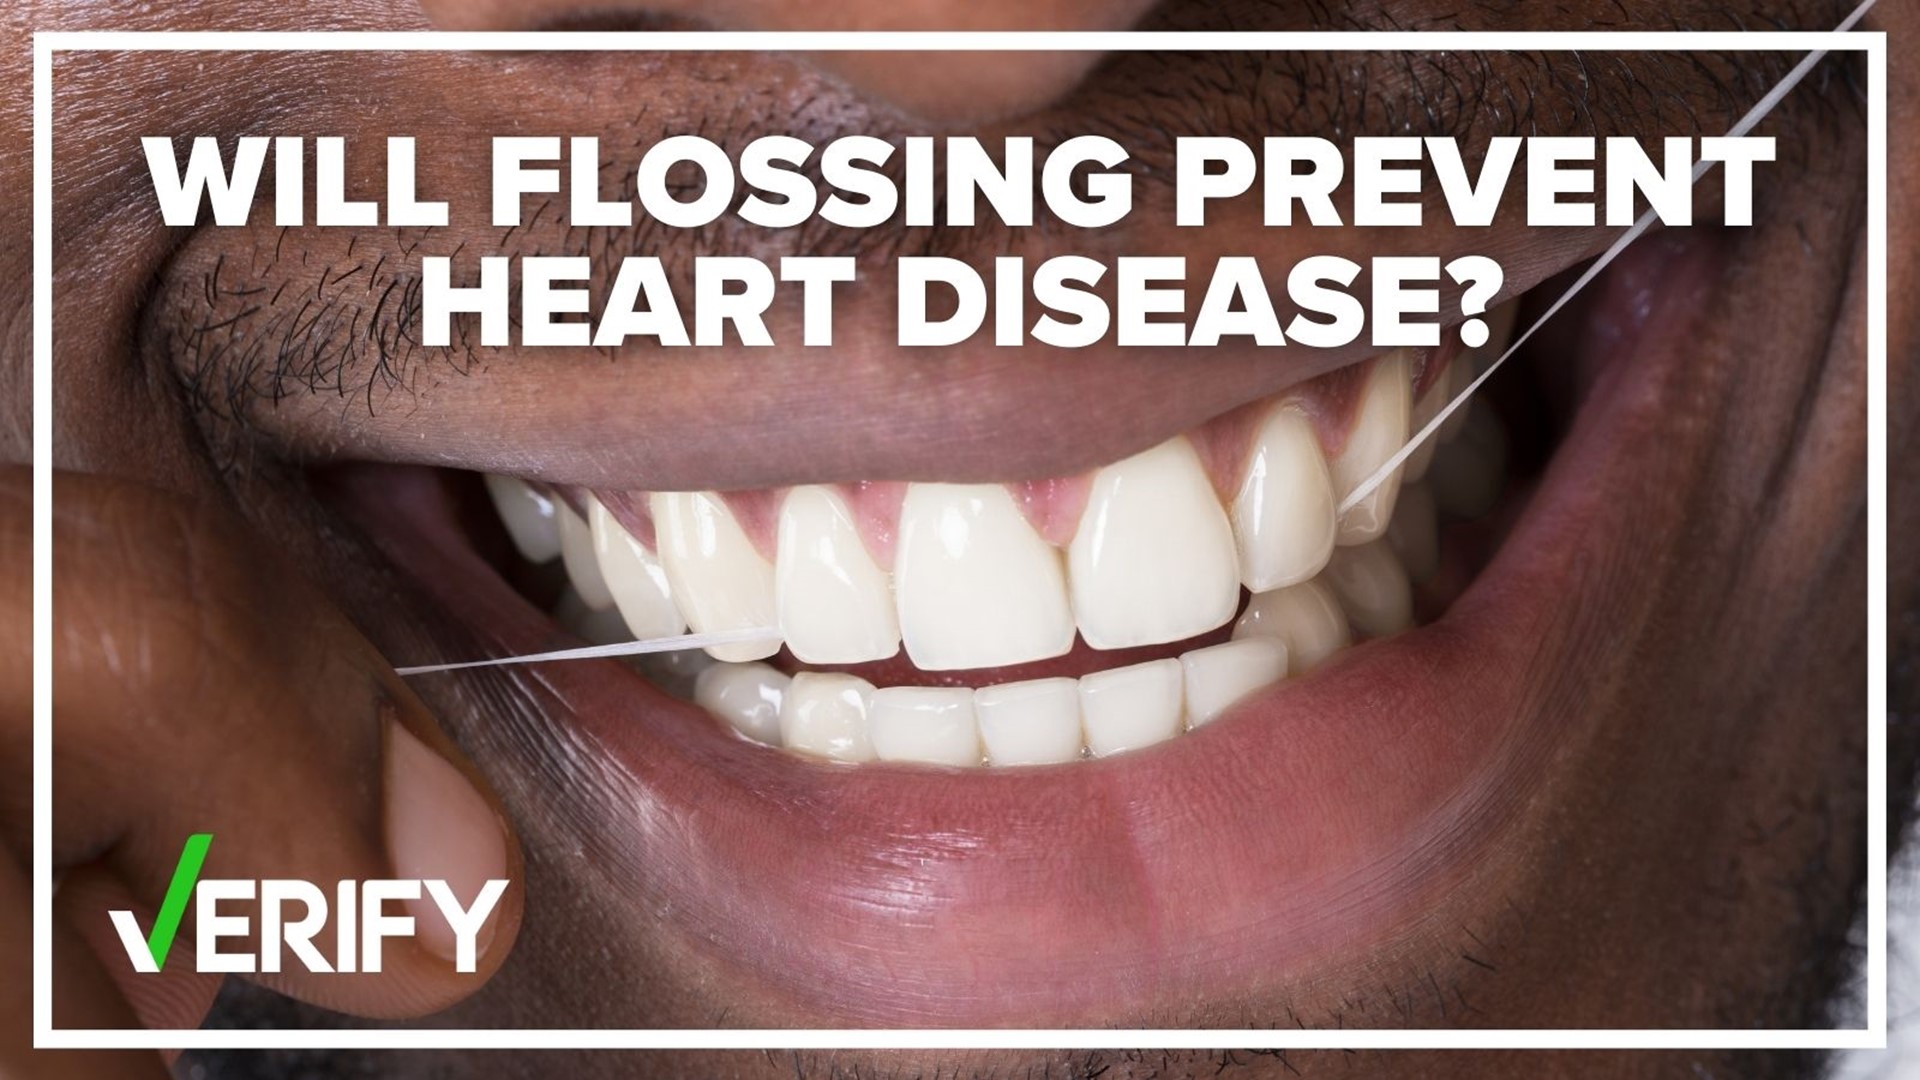 Did you floss this morning? Dentists say it's important for healthy teeth, but could it also affect your heart health, too?